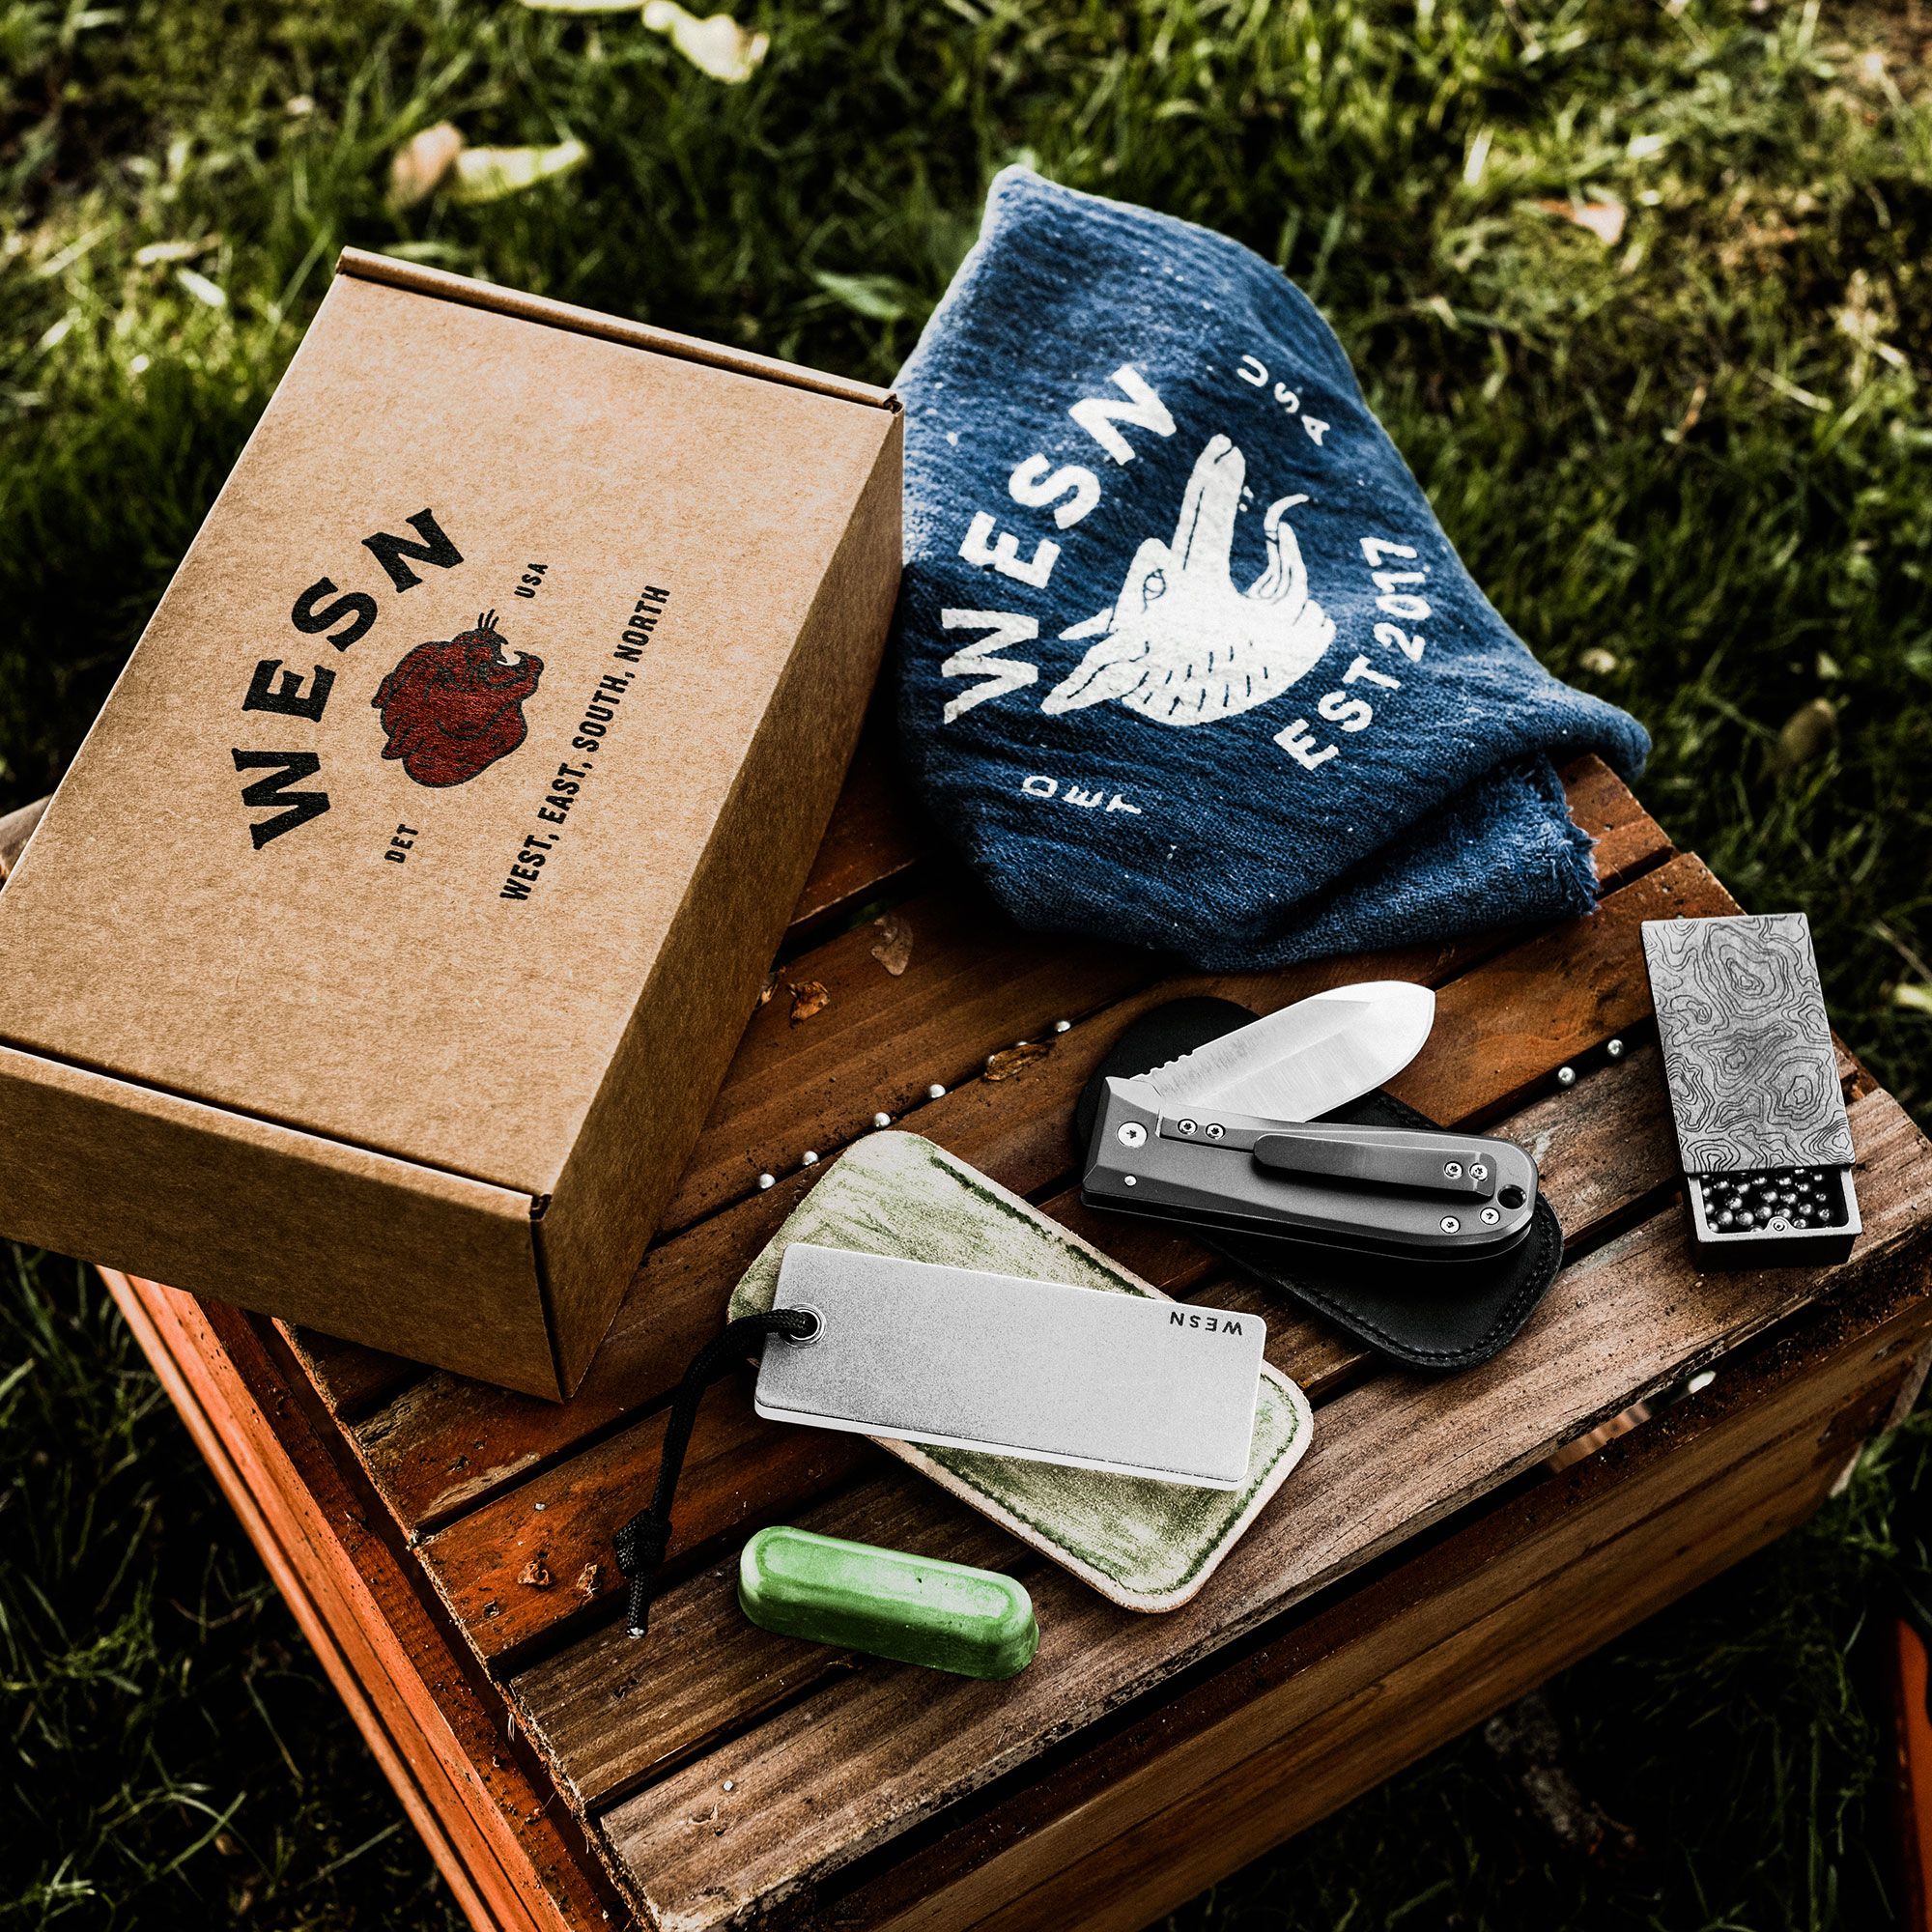 Save up to $70 on WESN's Fully-Loaded Father's Day EDC Gift Boxes